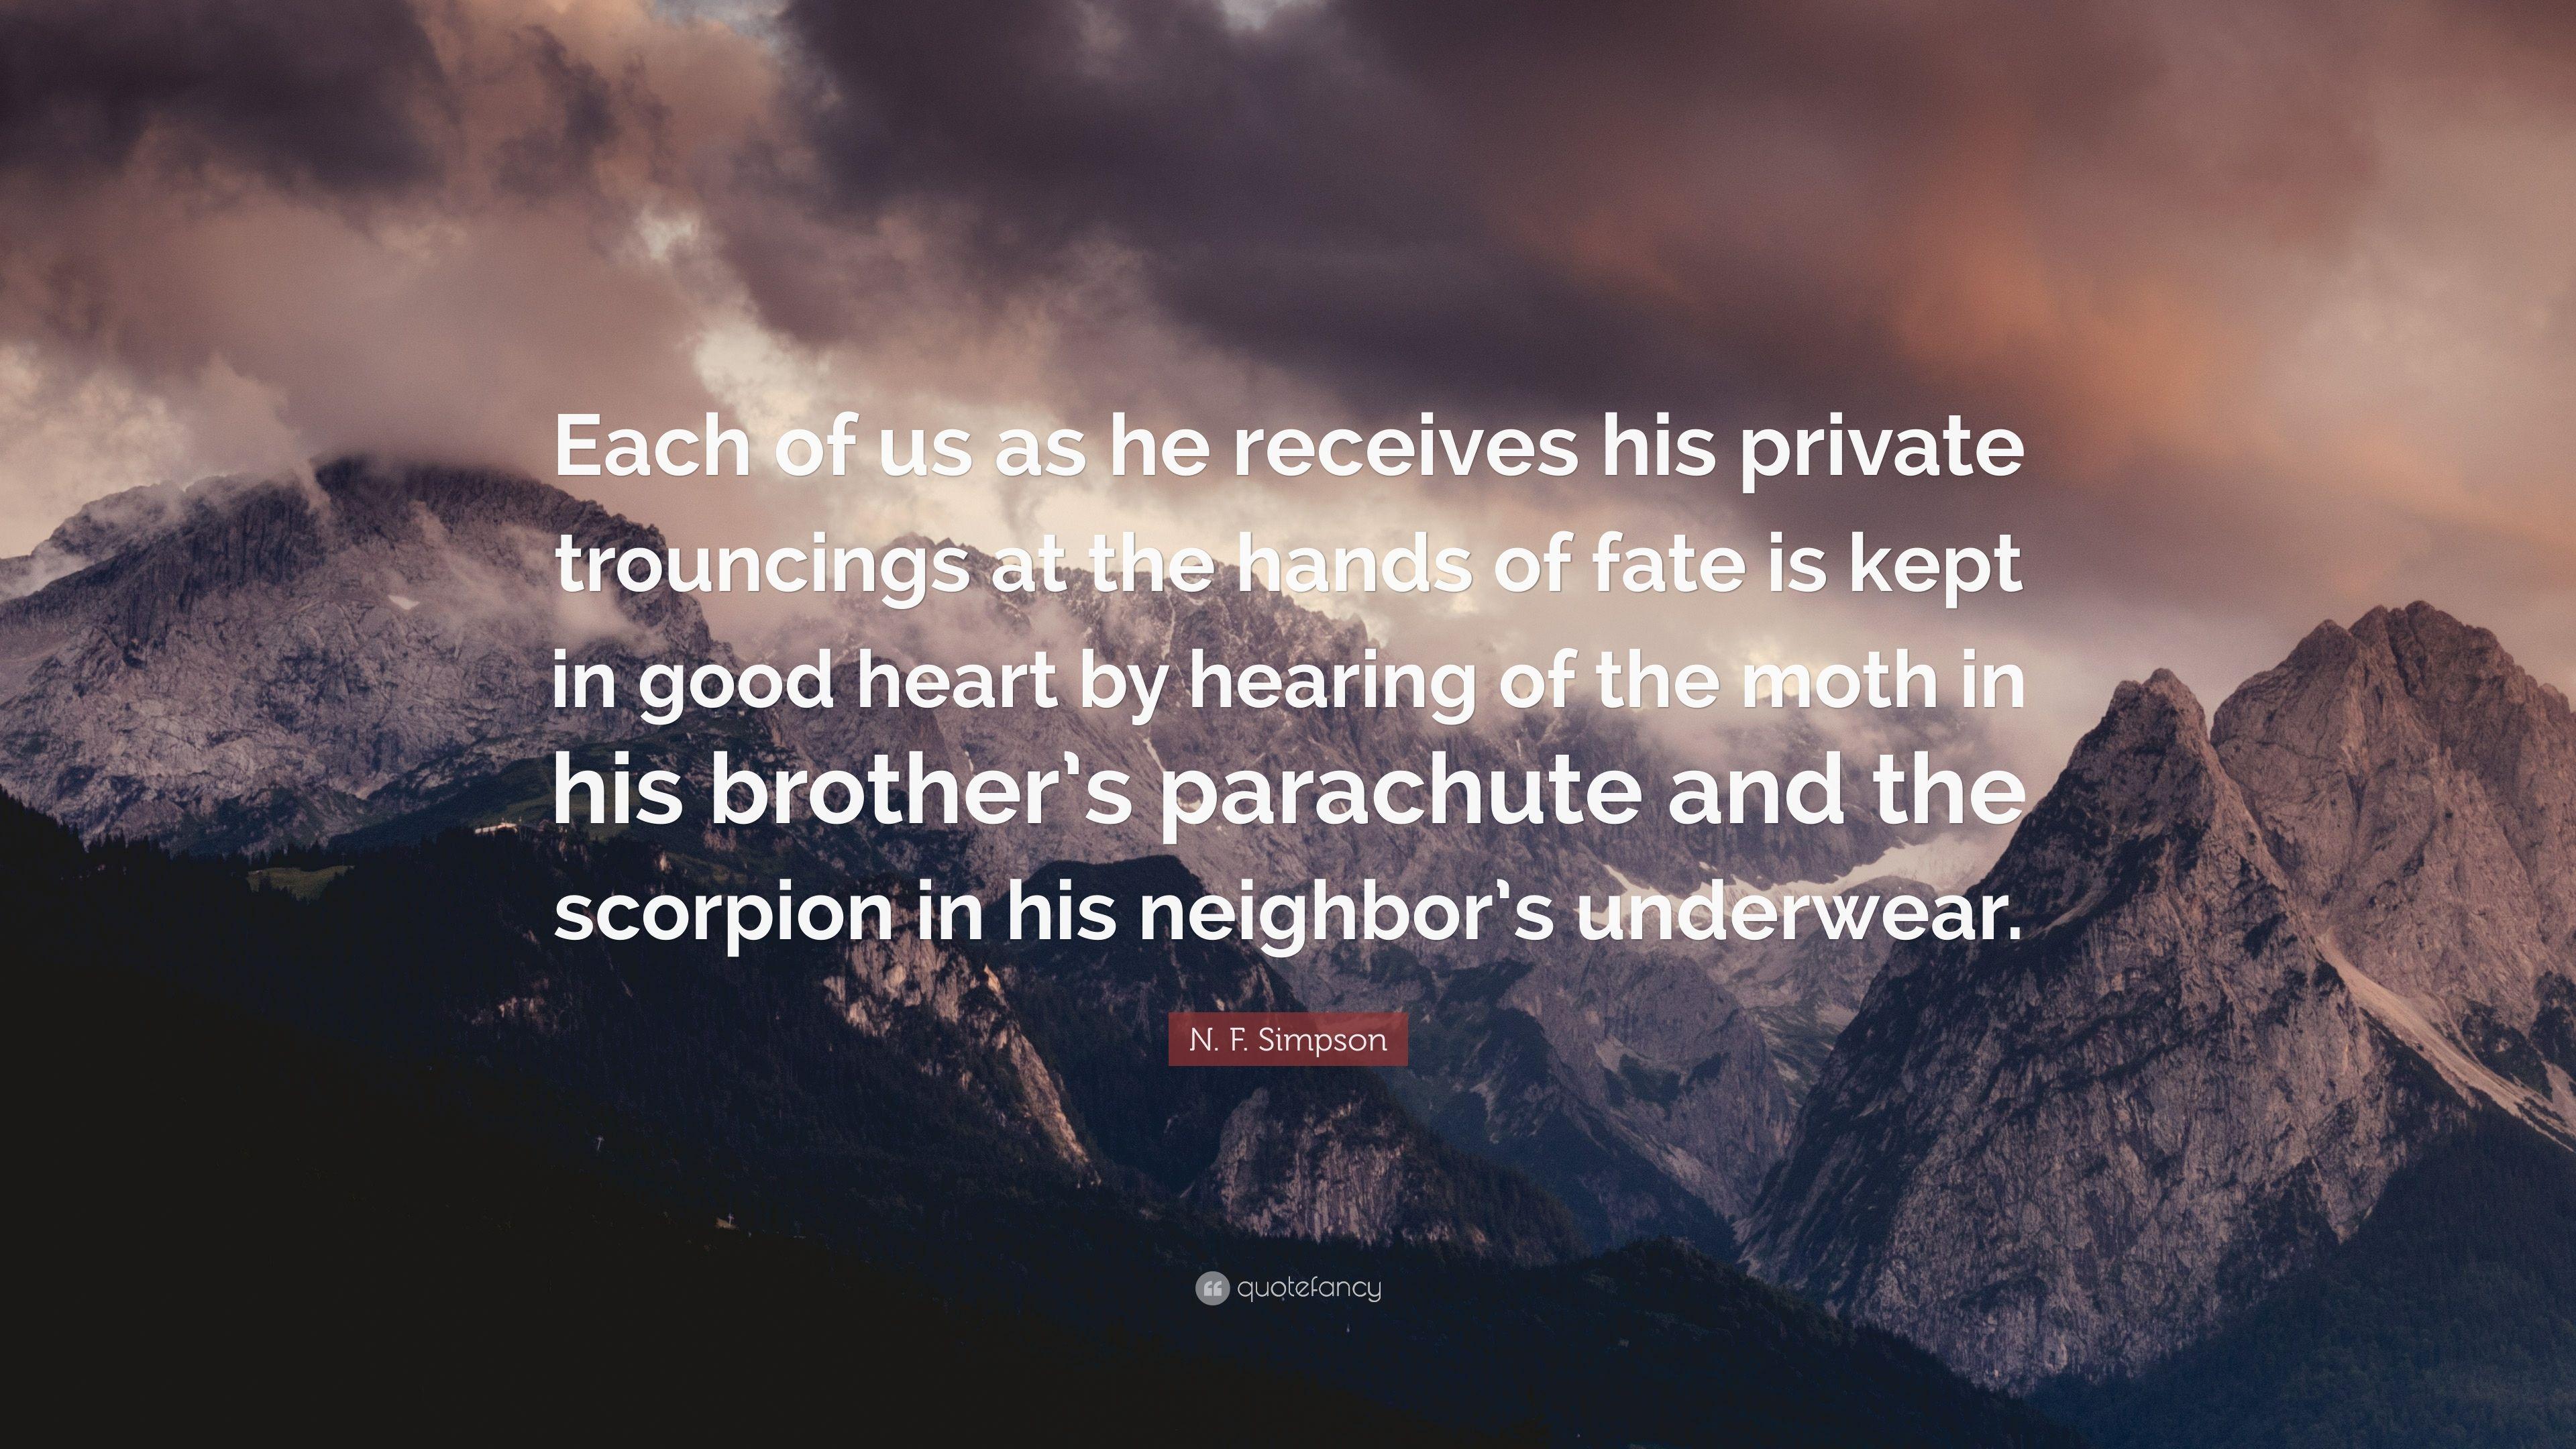 N. F. Simpson Quote: “Each of us as he receives his private